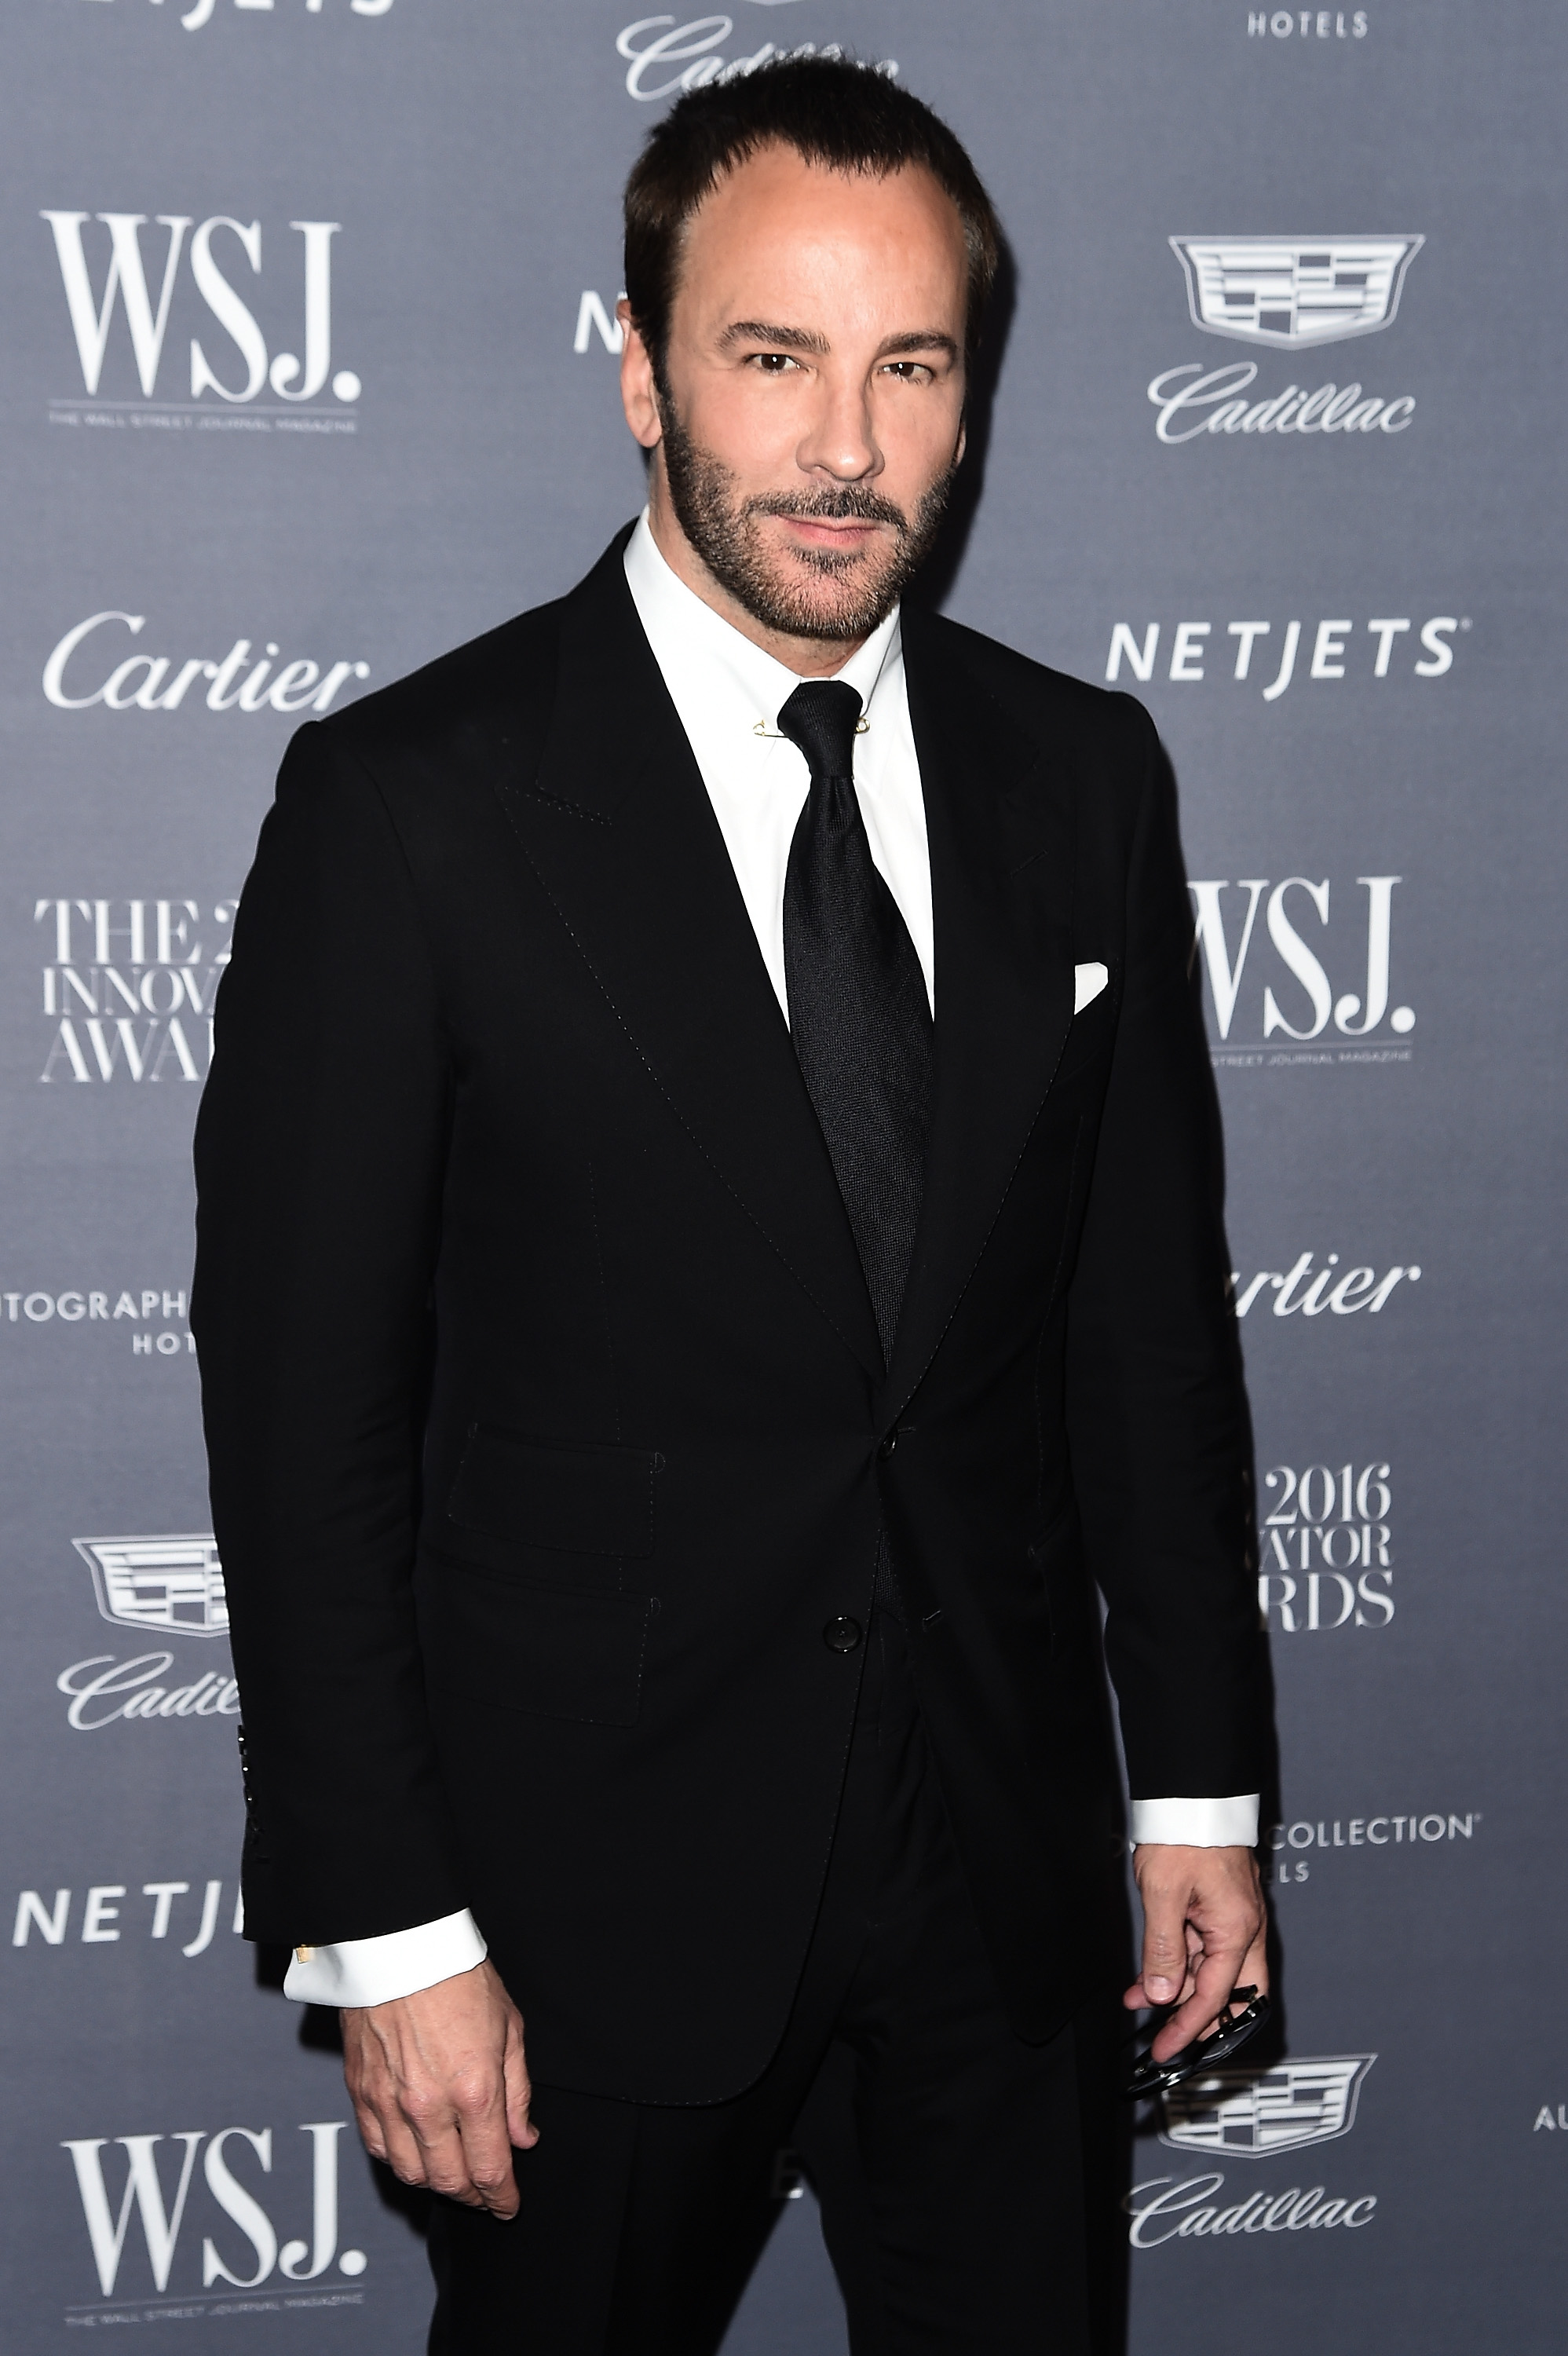 Tom Ford! The Weeknd! WSJ. Magazine Honors Innovators at Annual Gala